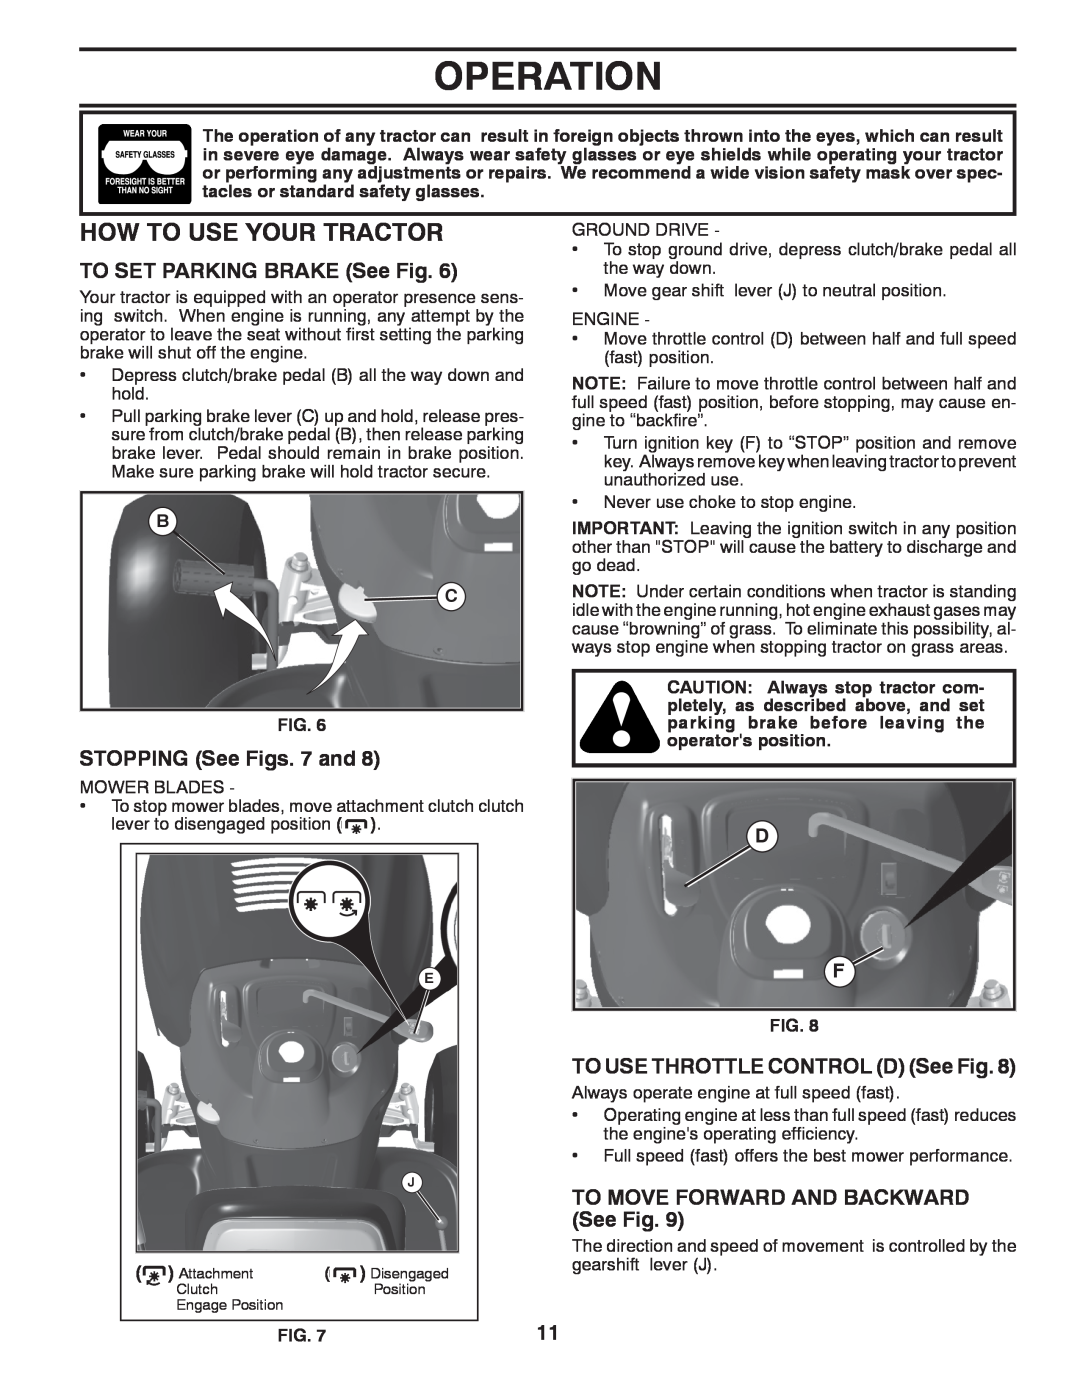 Poulan 96042003505 manual Operation, How To Use Your Tractor, TO SET PARKING BRAKE See Fig, STOPPING See Figs. 7 and 